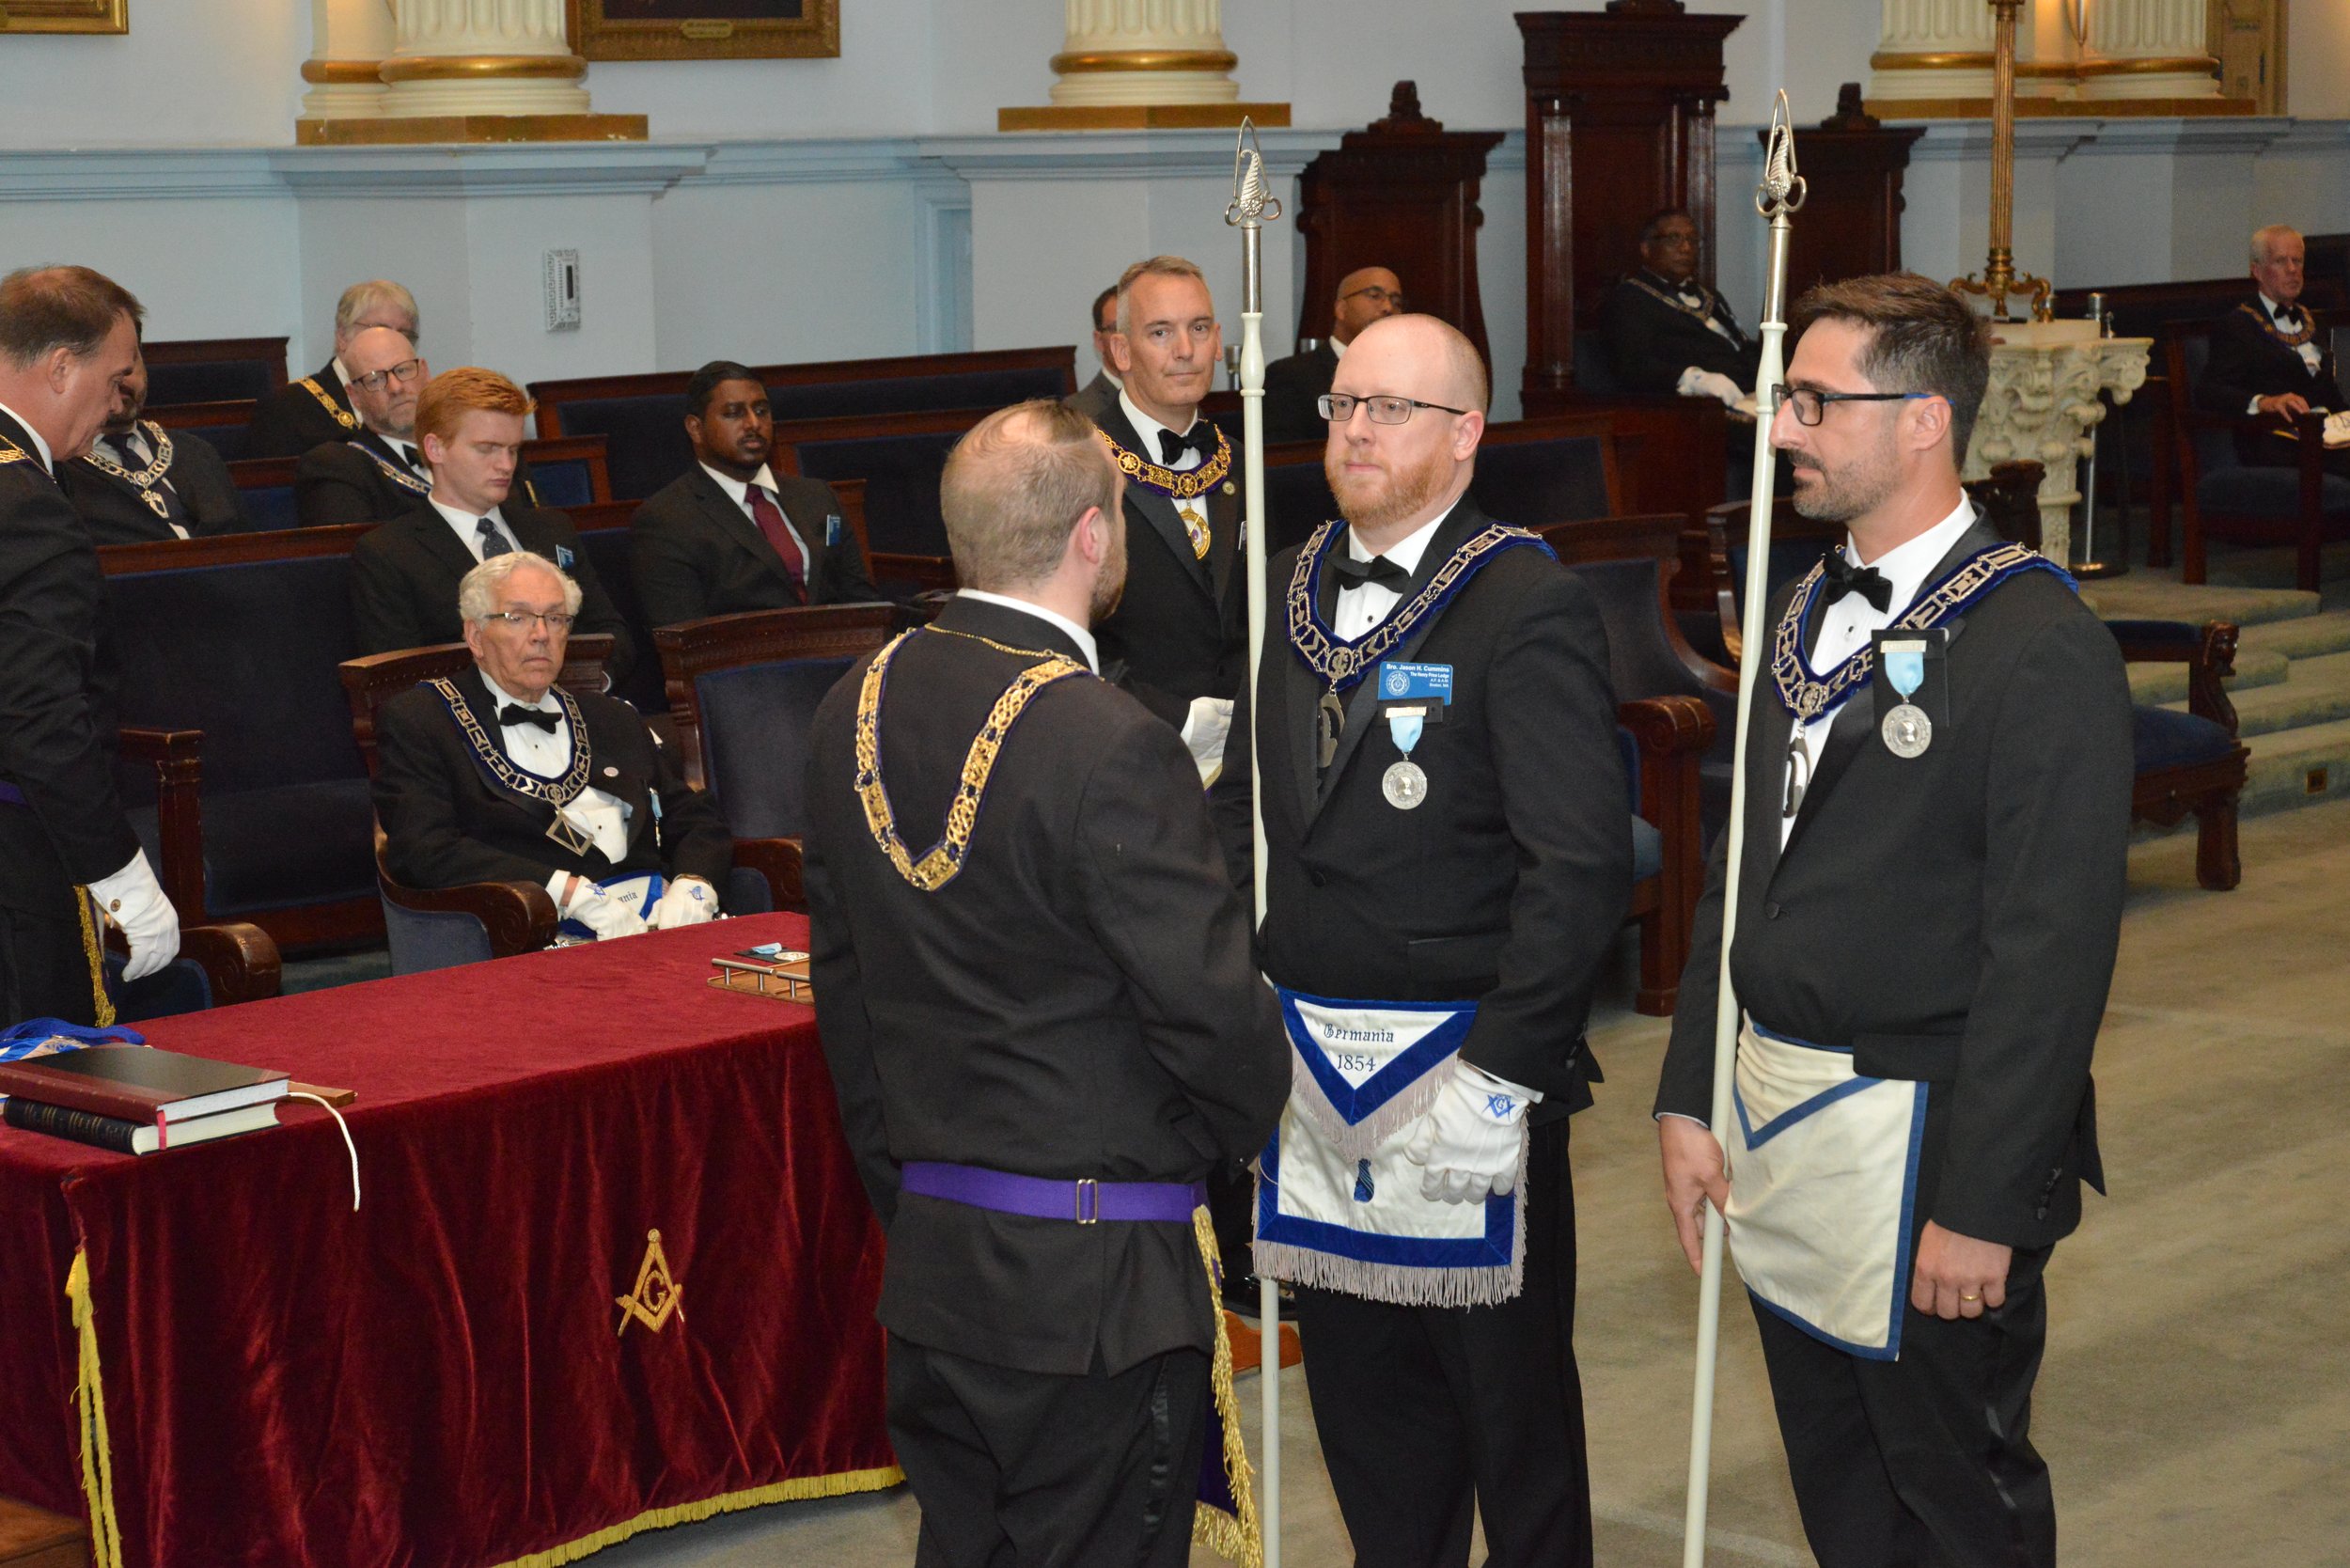  The Grand Steward investing the Senior Steward, Bro. Jason Cummins, and Junior Steward, Bro. Udson DaSilva, with the jewels and staves of their office 